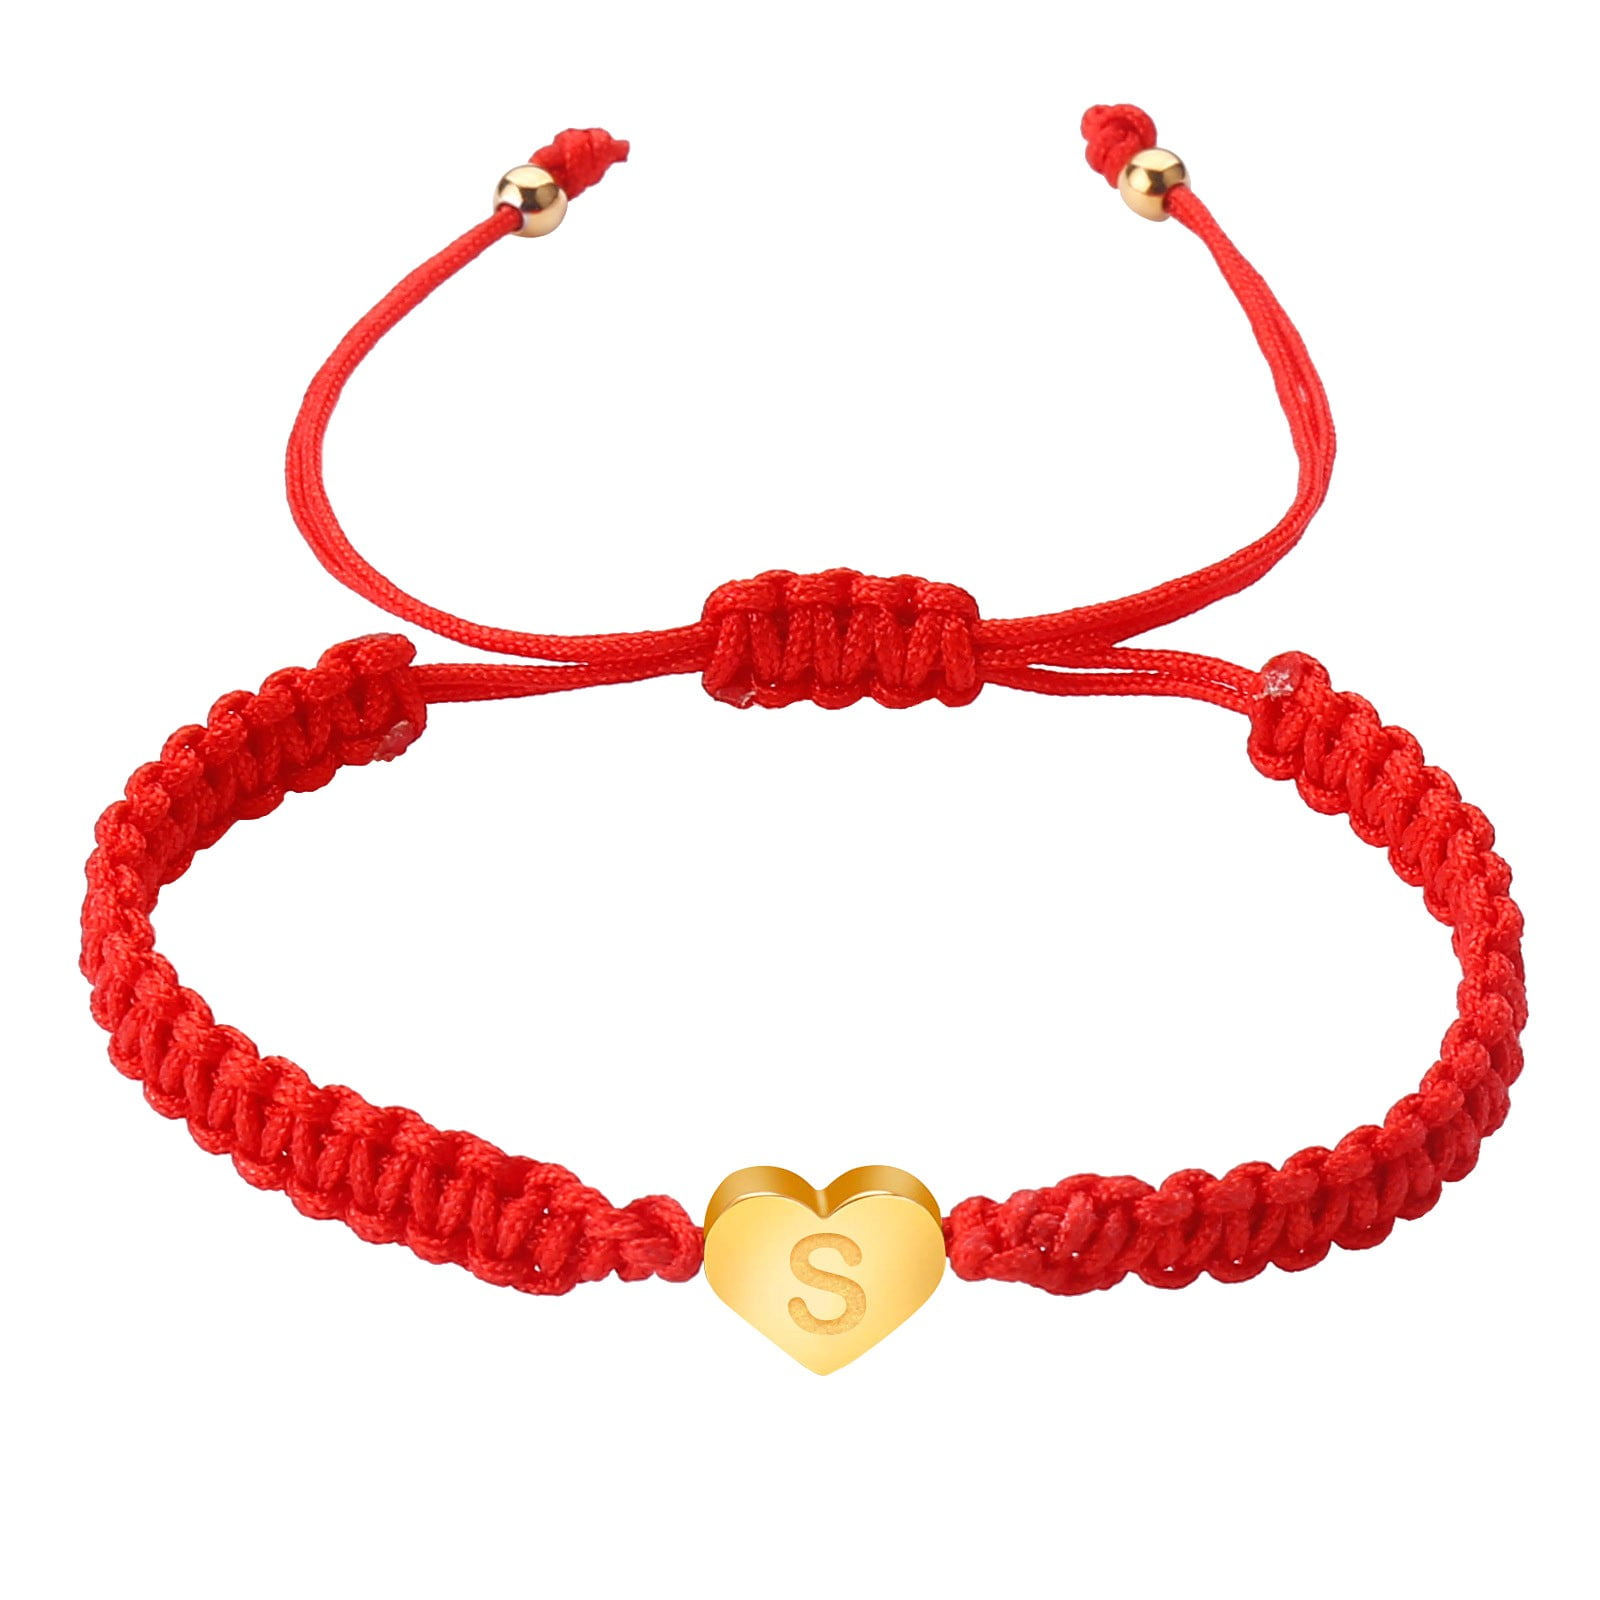 Xinqinghao Personalized 26 Initial Bracelet Stainless Steel Gold Plated  Letter Red Woven Bracelet Charm Bracelet Woven Bracelet For Men Women Girls  V 